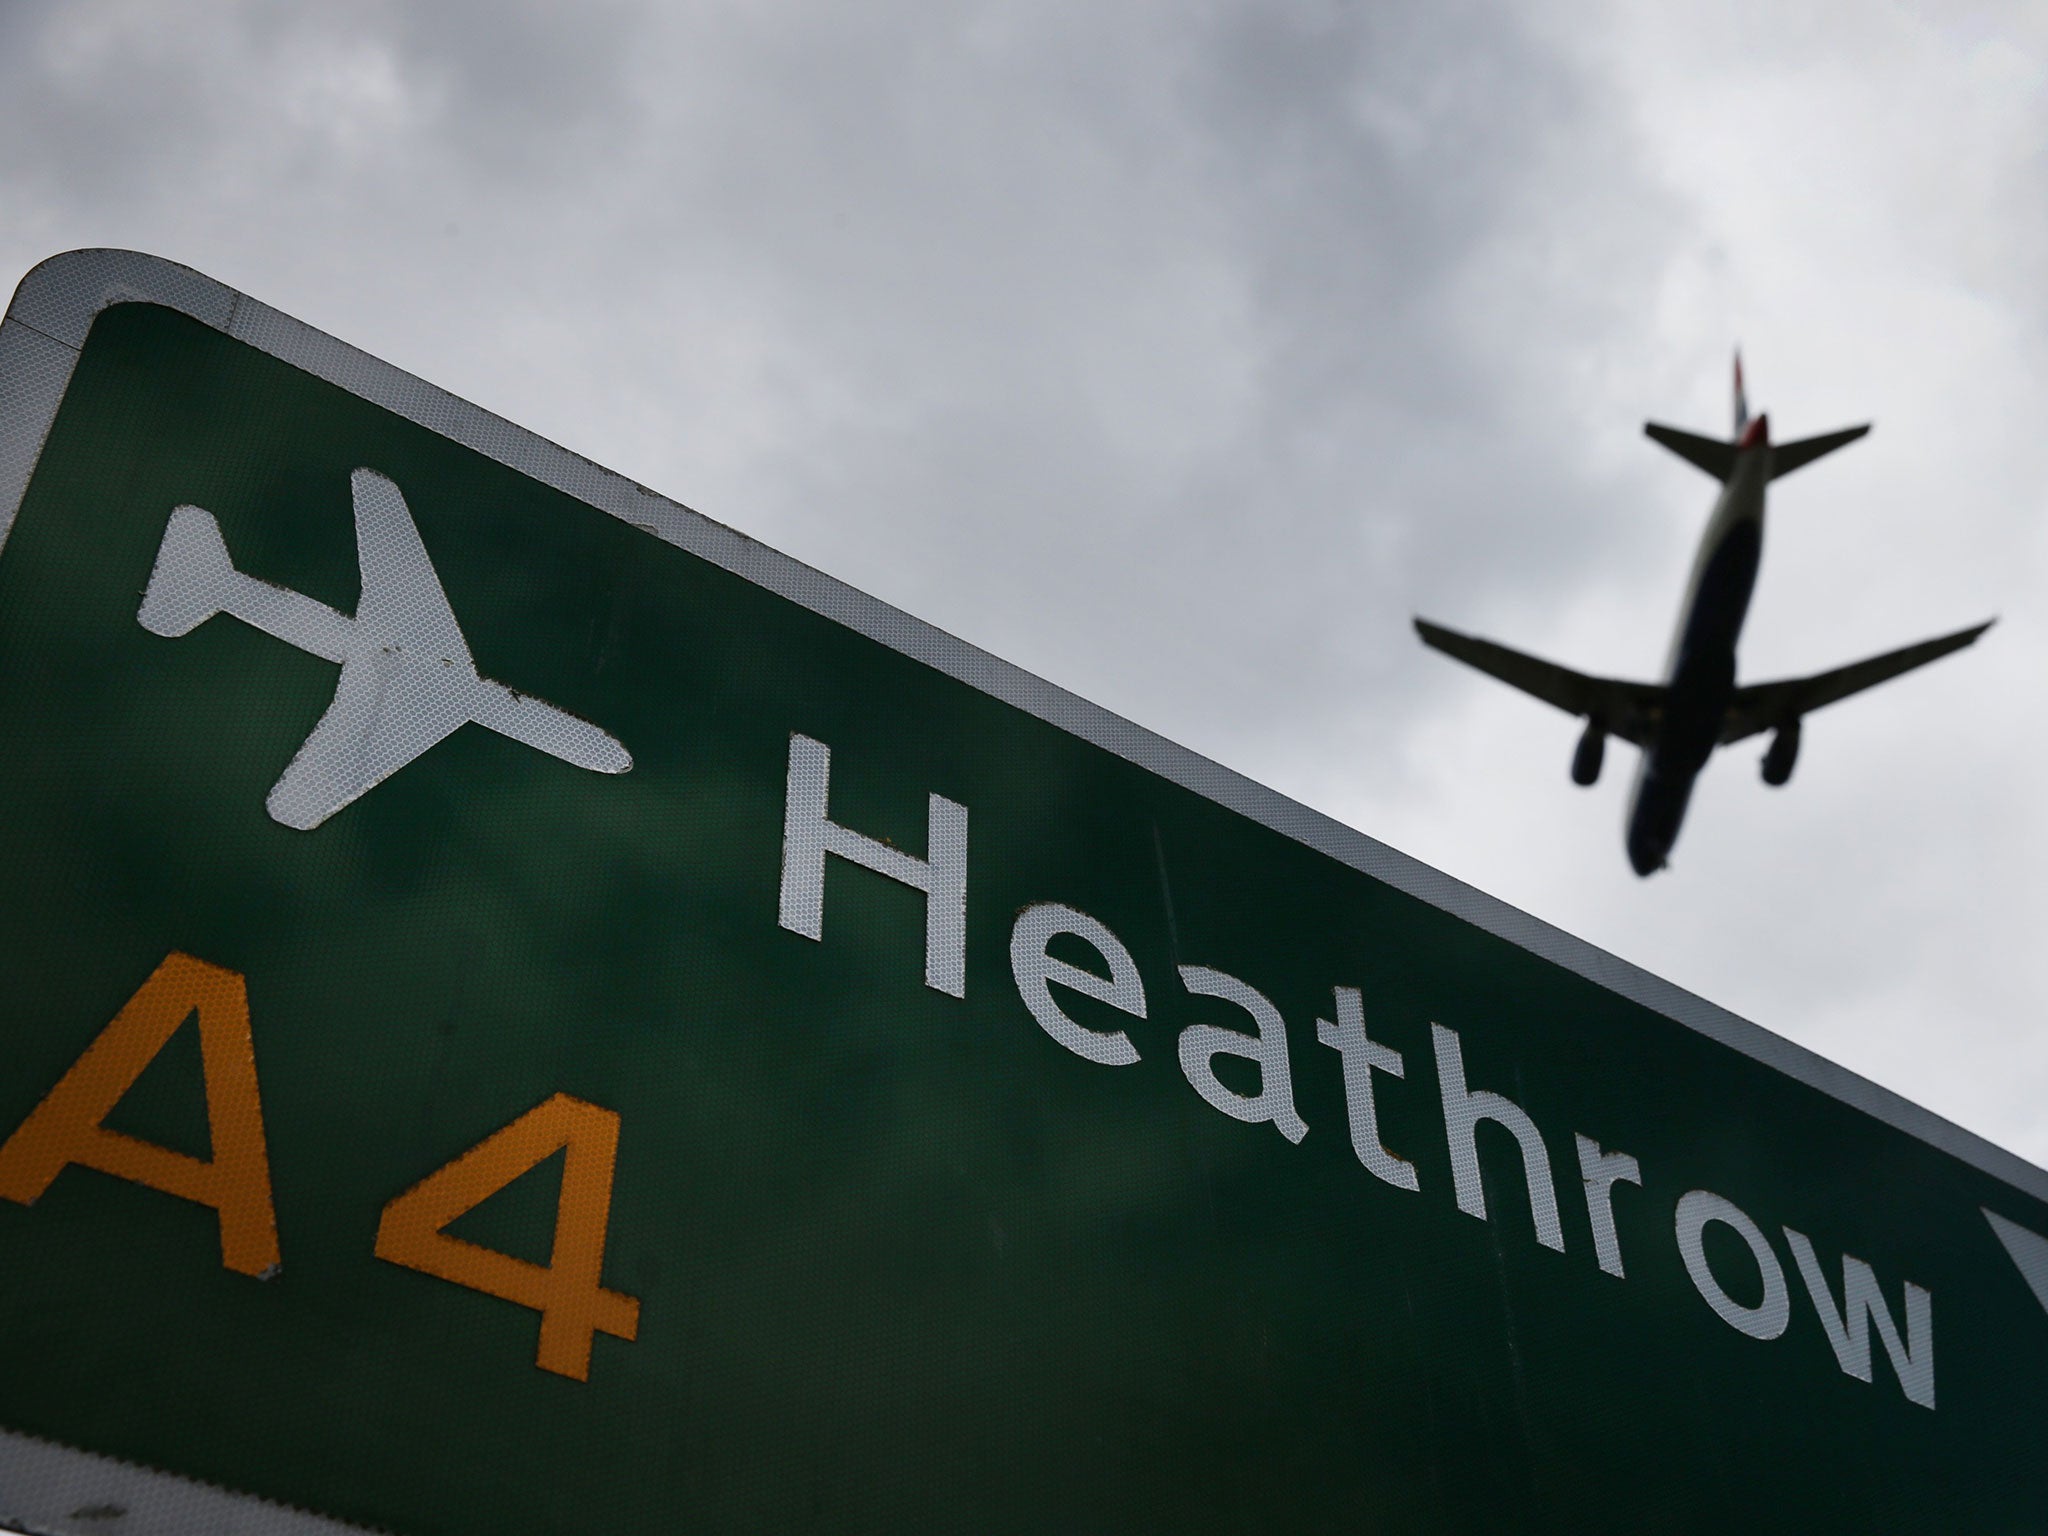 A spokesperson for Heathrow said that there had been "some disruption" due to an earlier IT system failure, but that the issues had now been now resolved